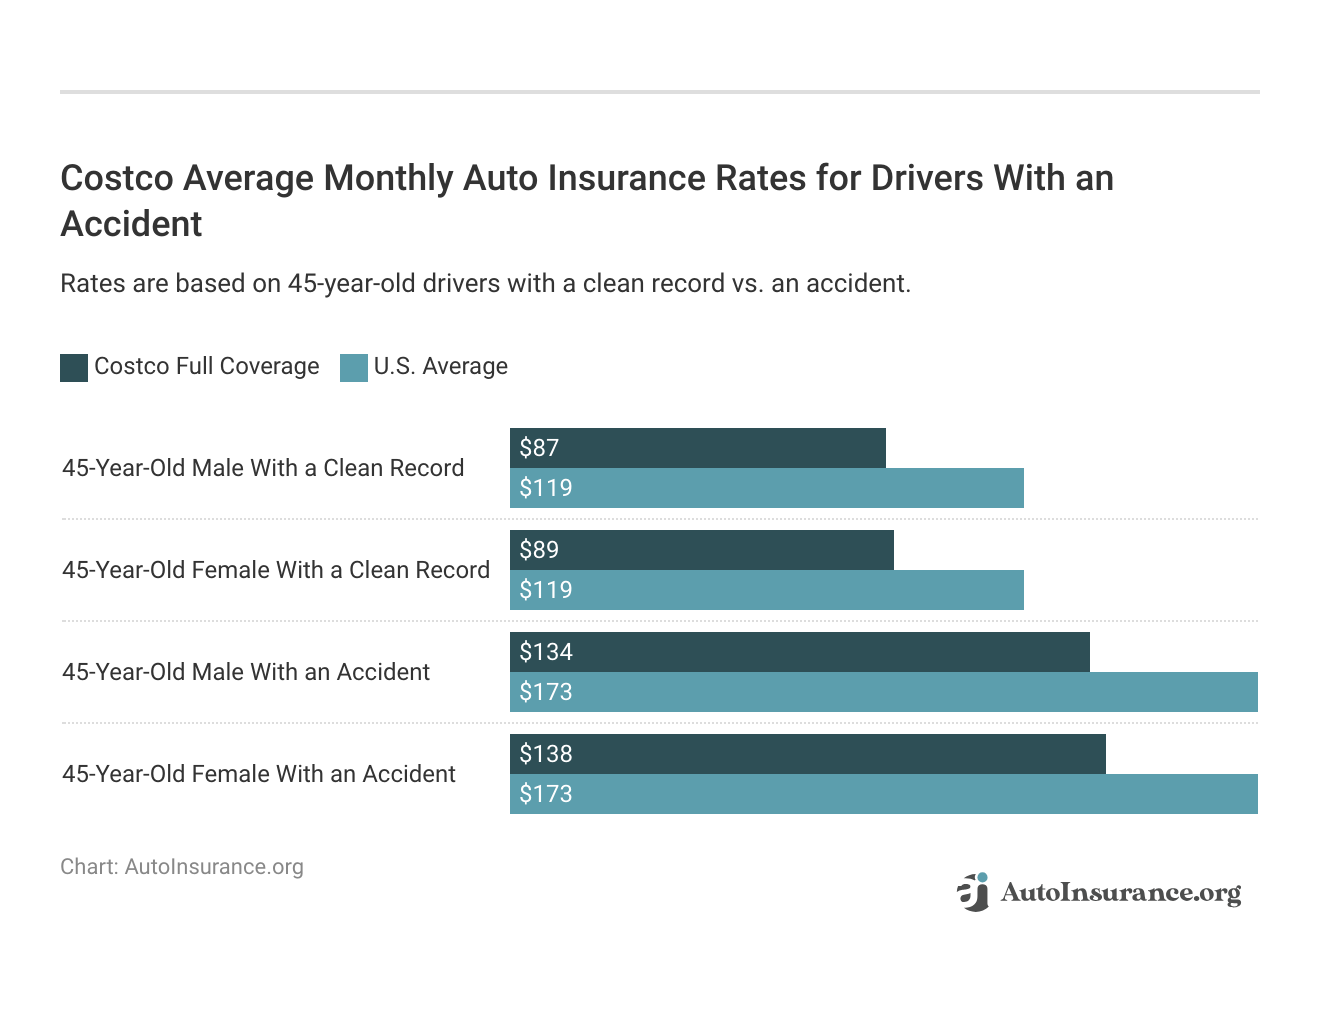 <h3>Costco Average Monthly Auto Insurance Rates for Drivers With an Accident</h3>